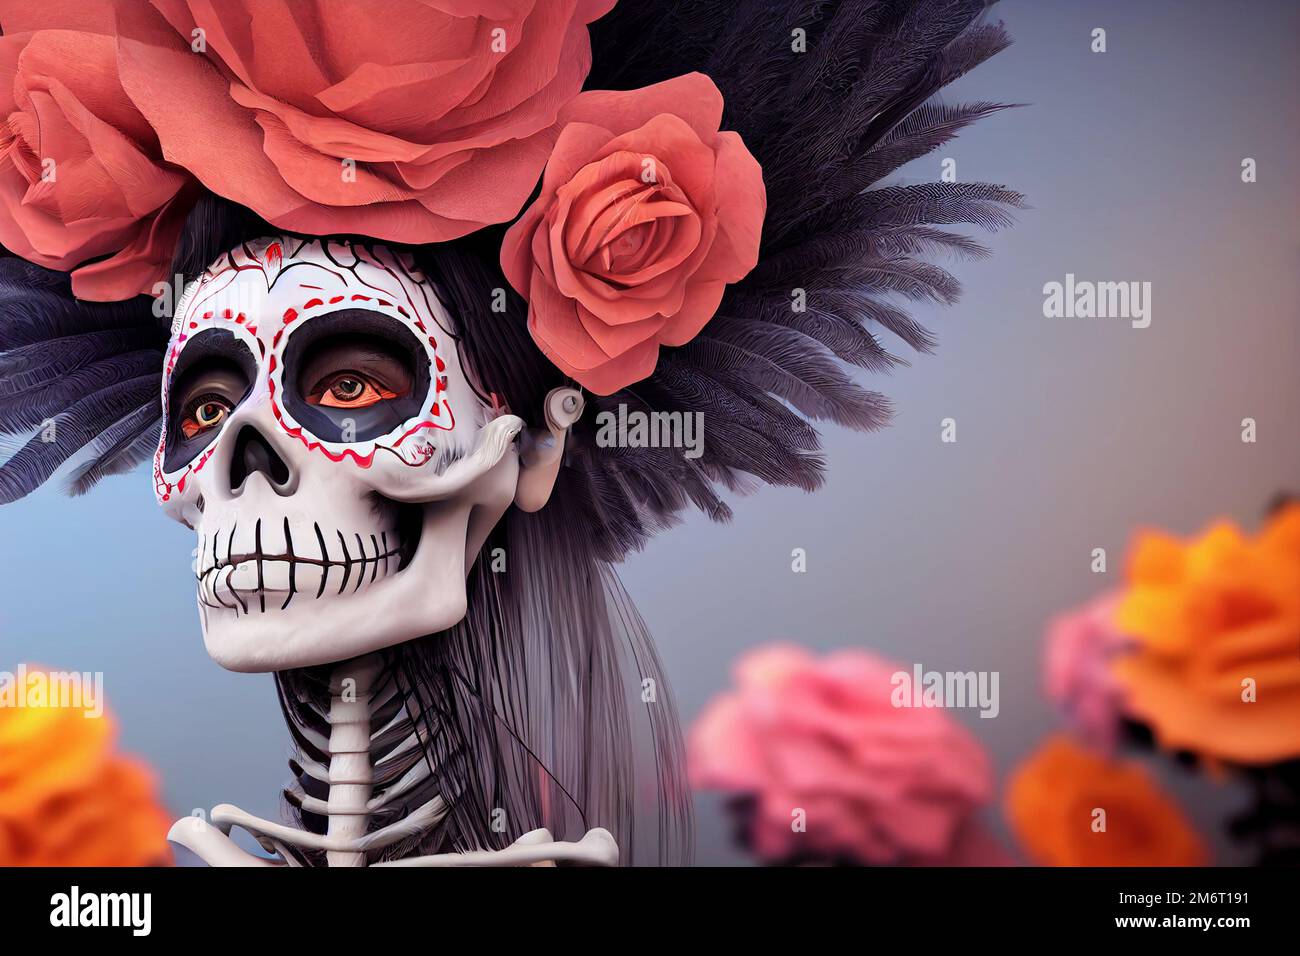 Female skeleton with make up and large fancy hat, Calavera Catrina, Mexican day of the Dead Stock Photo